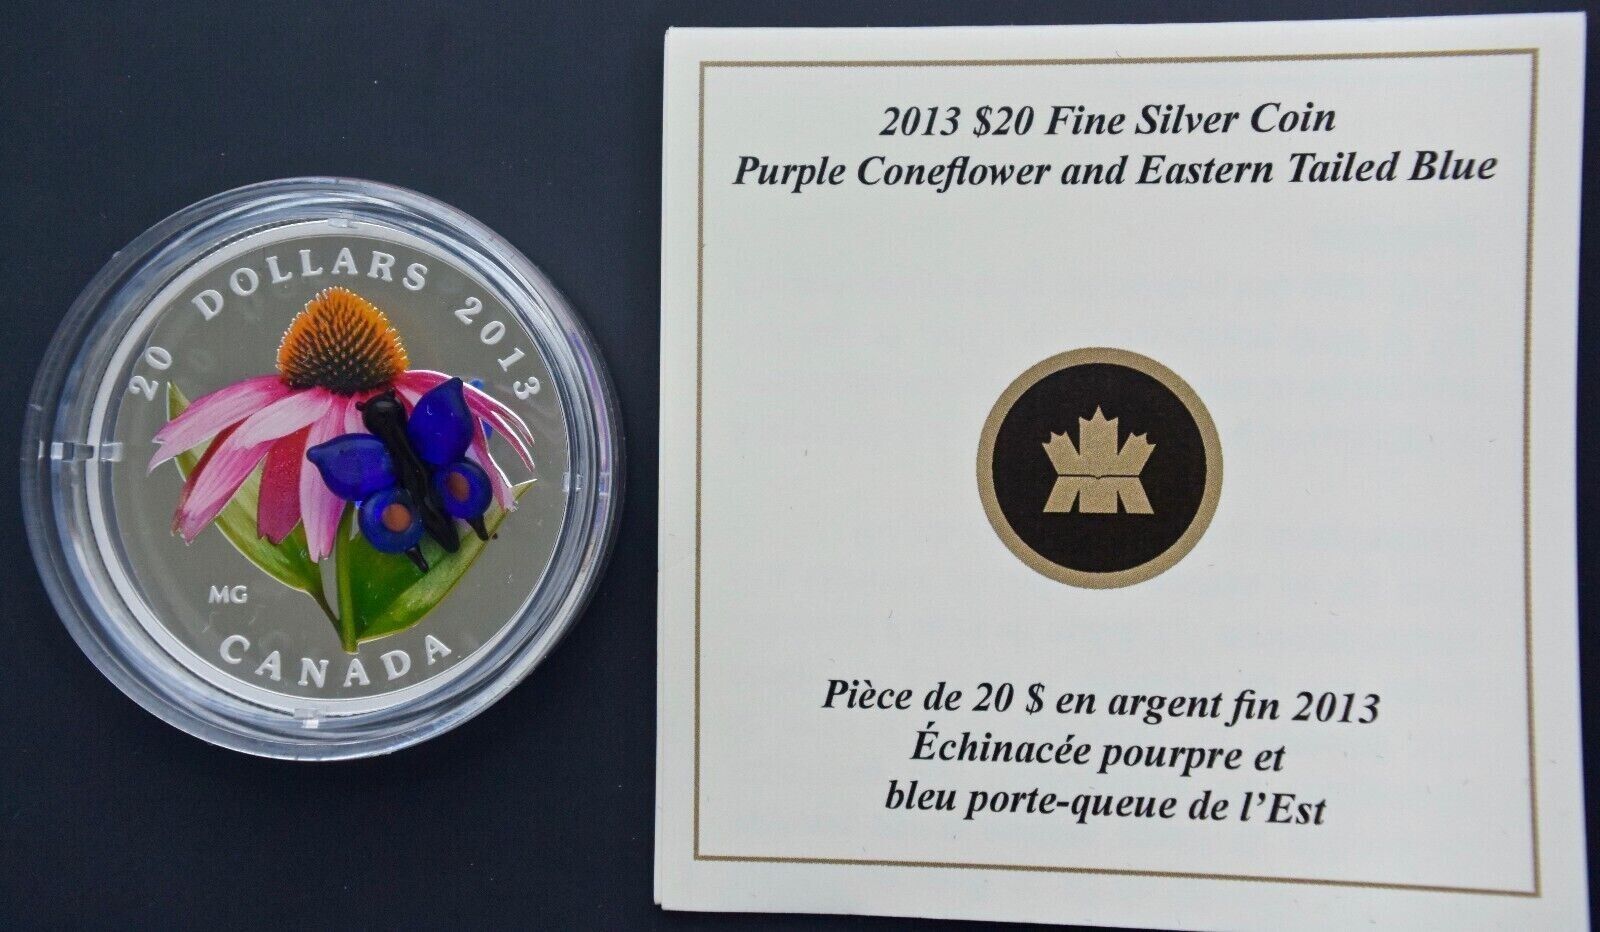 1 Oz Silver Coin 2013 Canada Glass Purple Coneflower & Eastern Tailed Butterfly-classypw.com-9